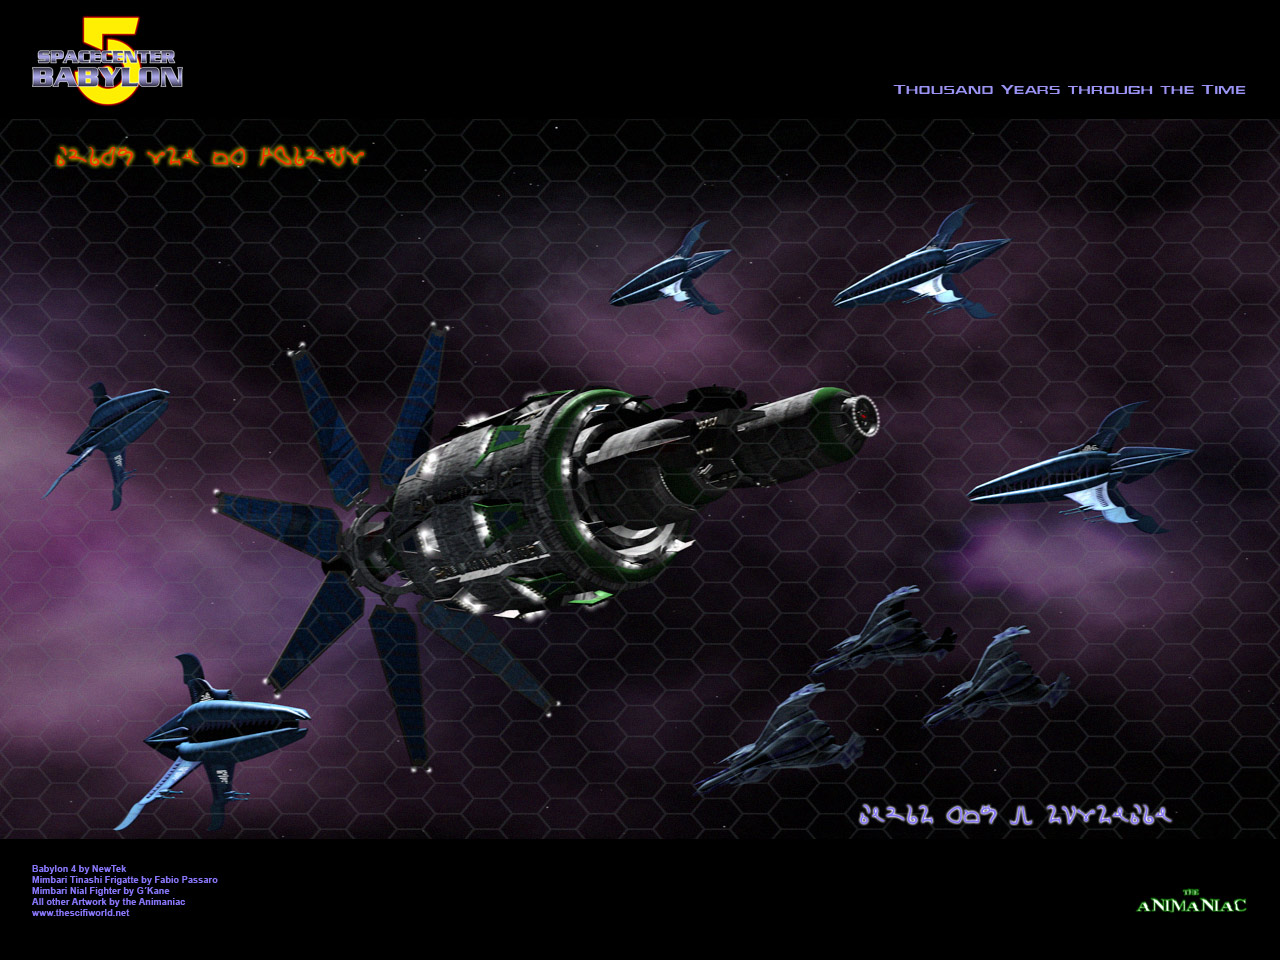 Babylon 5 wallpapers wallpaper images TV shows sci fi pictures scifi 1280x960